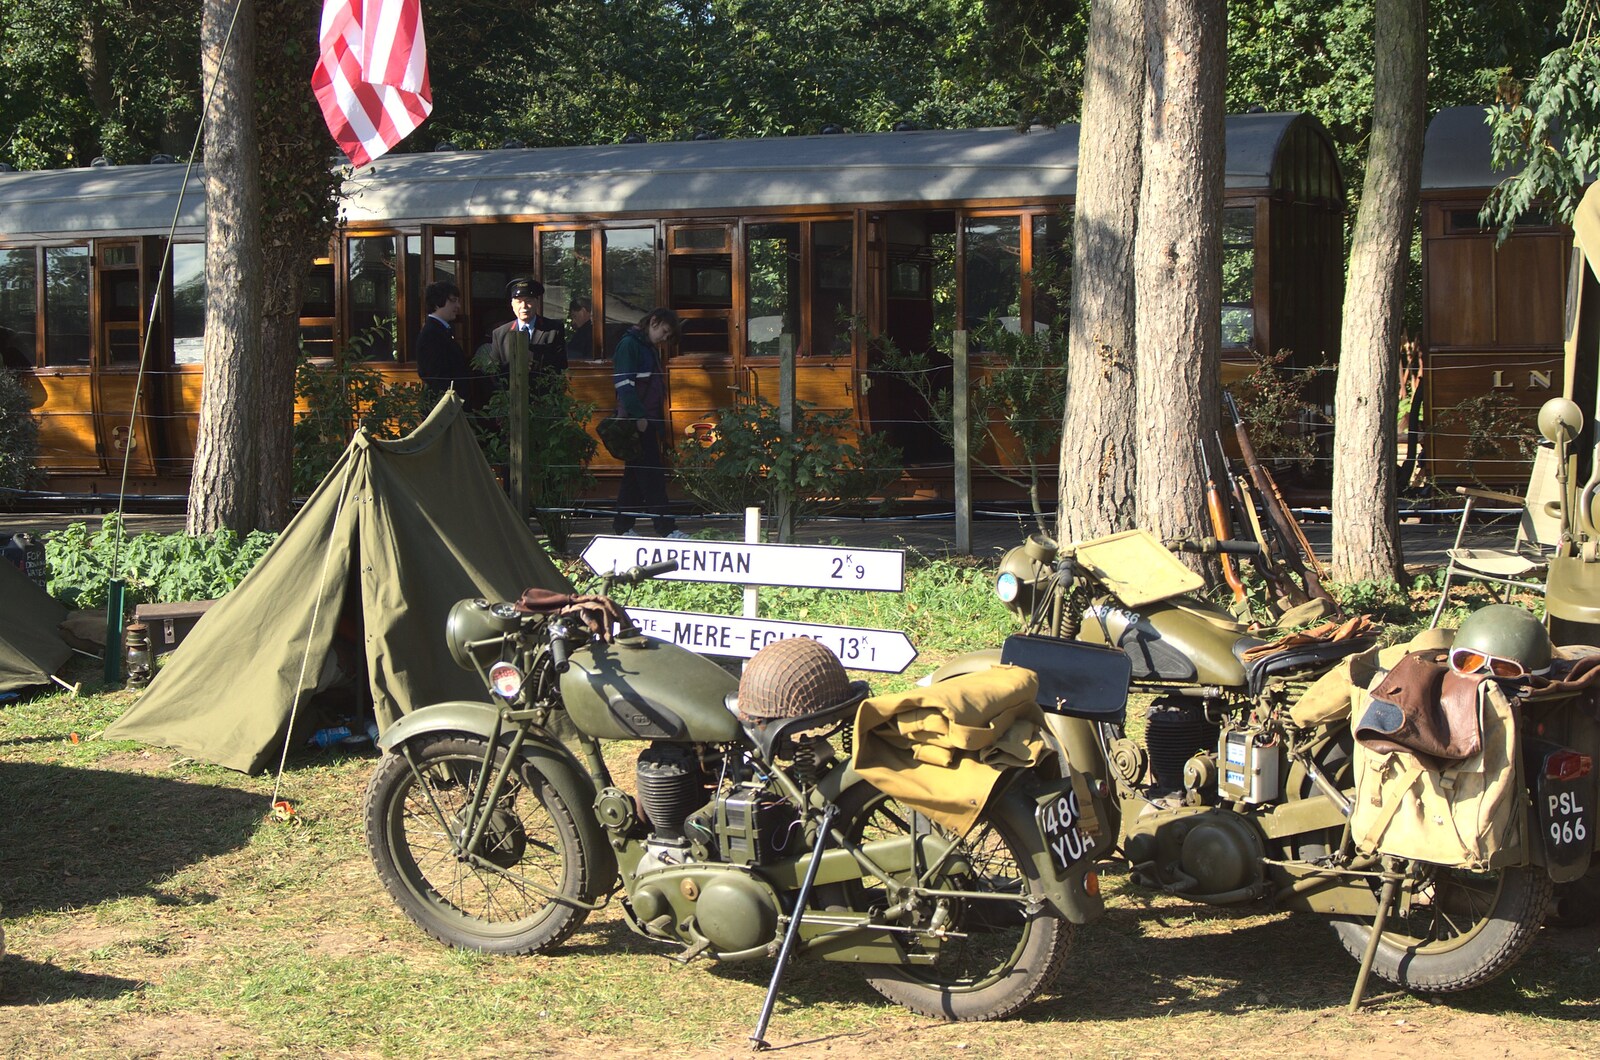 Army motorbikes from The 1940s Steam Train Weekend, Holt, Norfolk - 18th September 2011